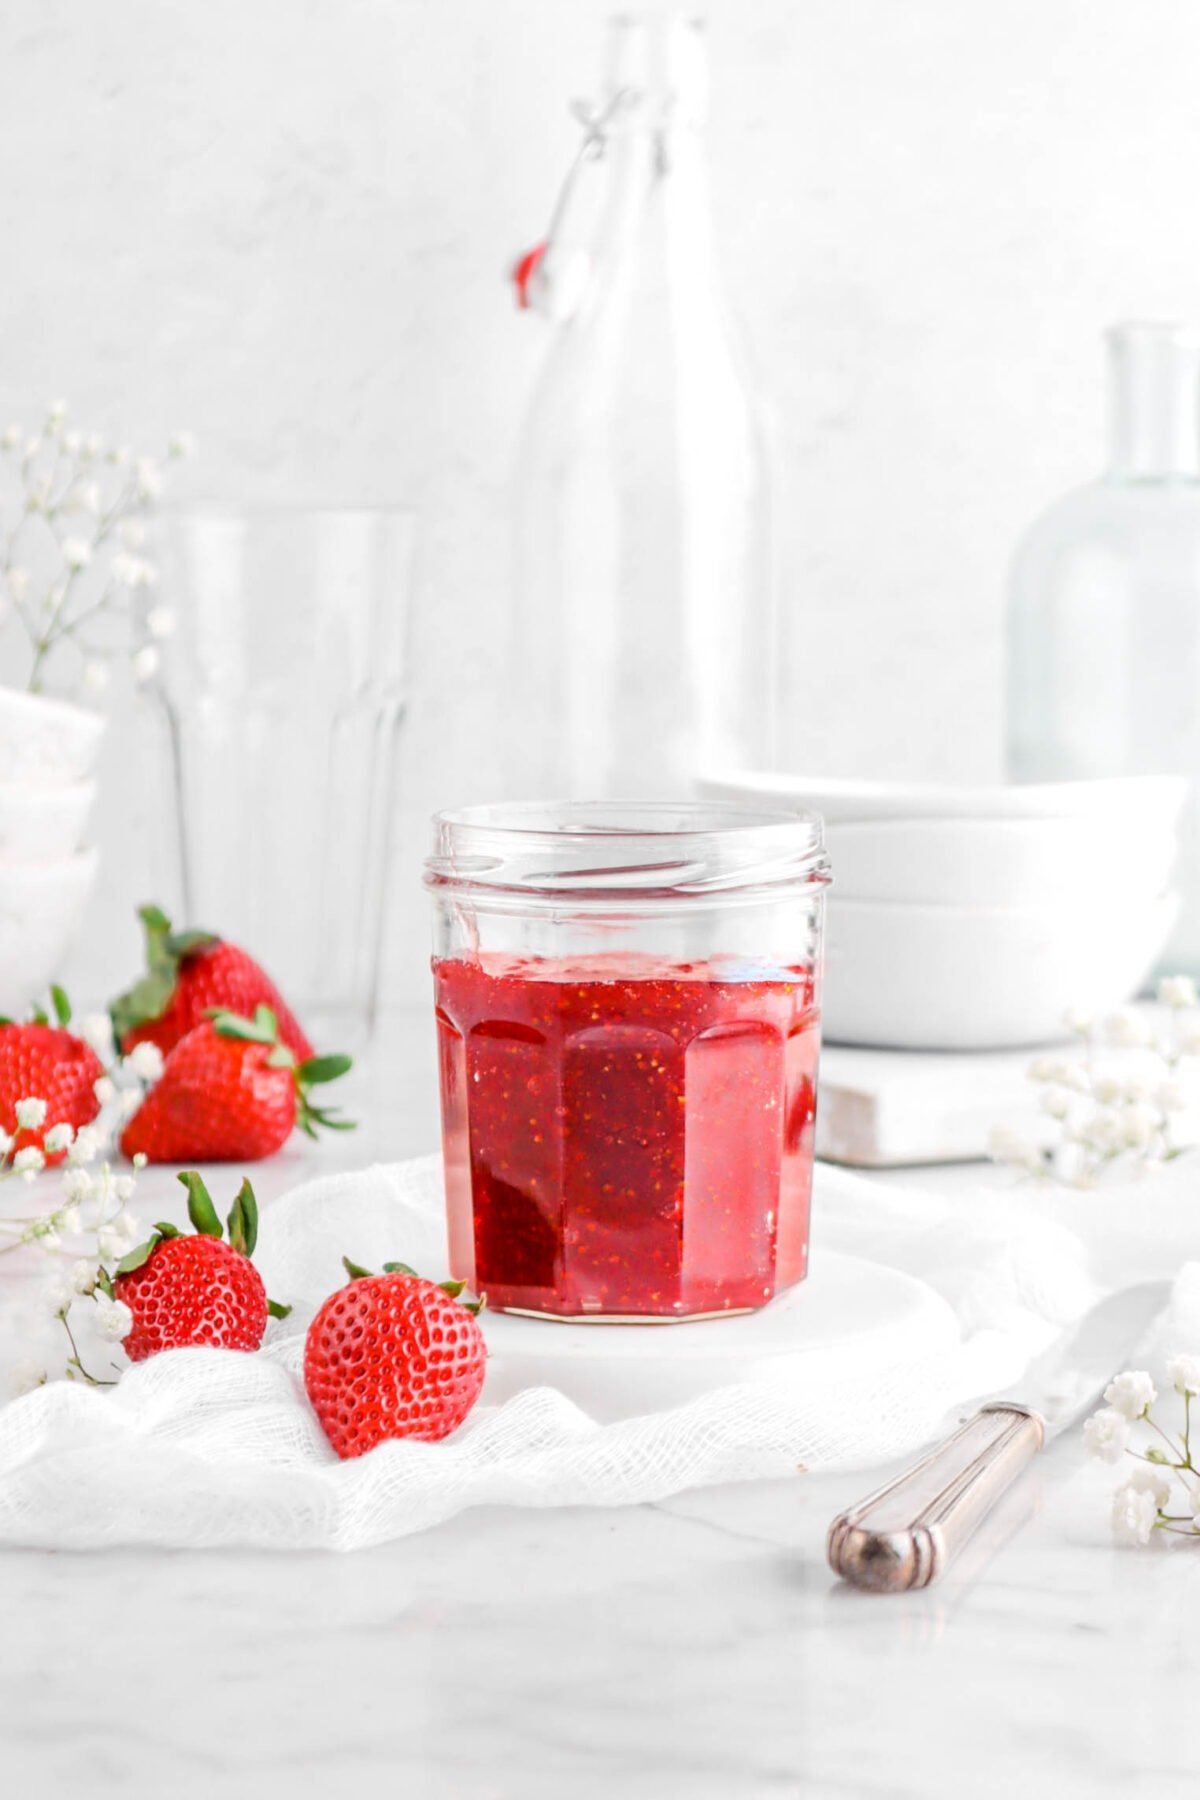 strawberry jam in glass jar on upside down white plate with white cheese cloth, silver knife, fresh strawberries, flowers, and empty glasses behind